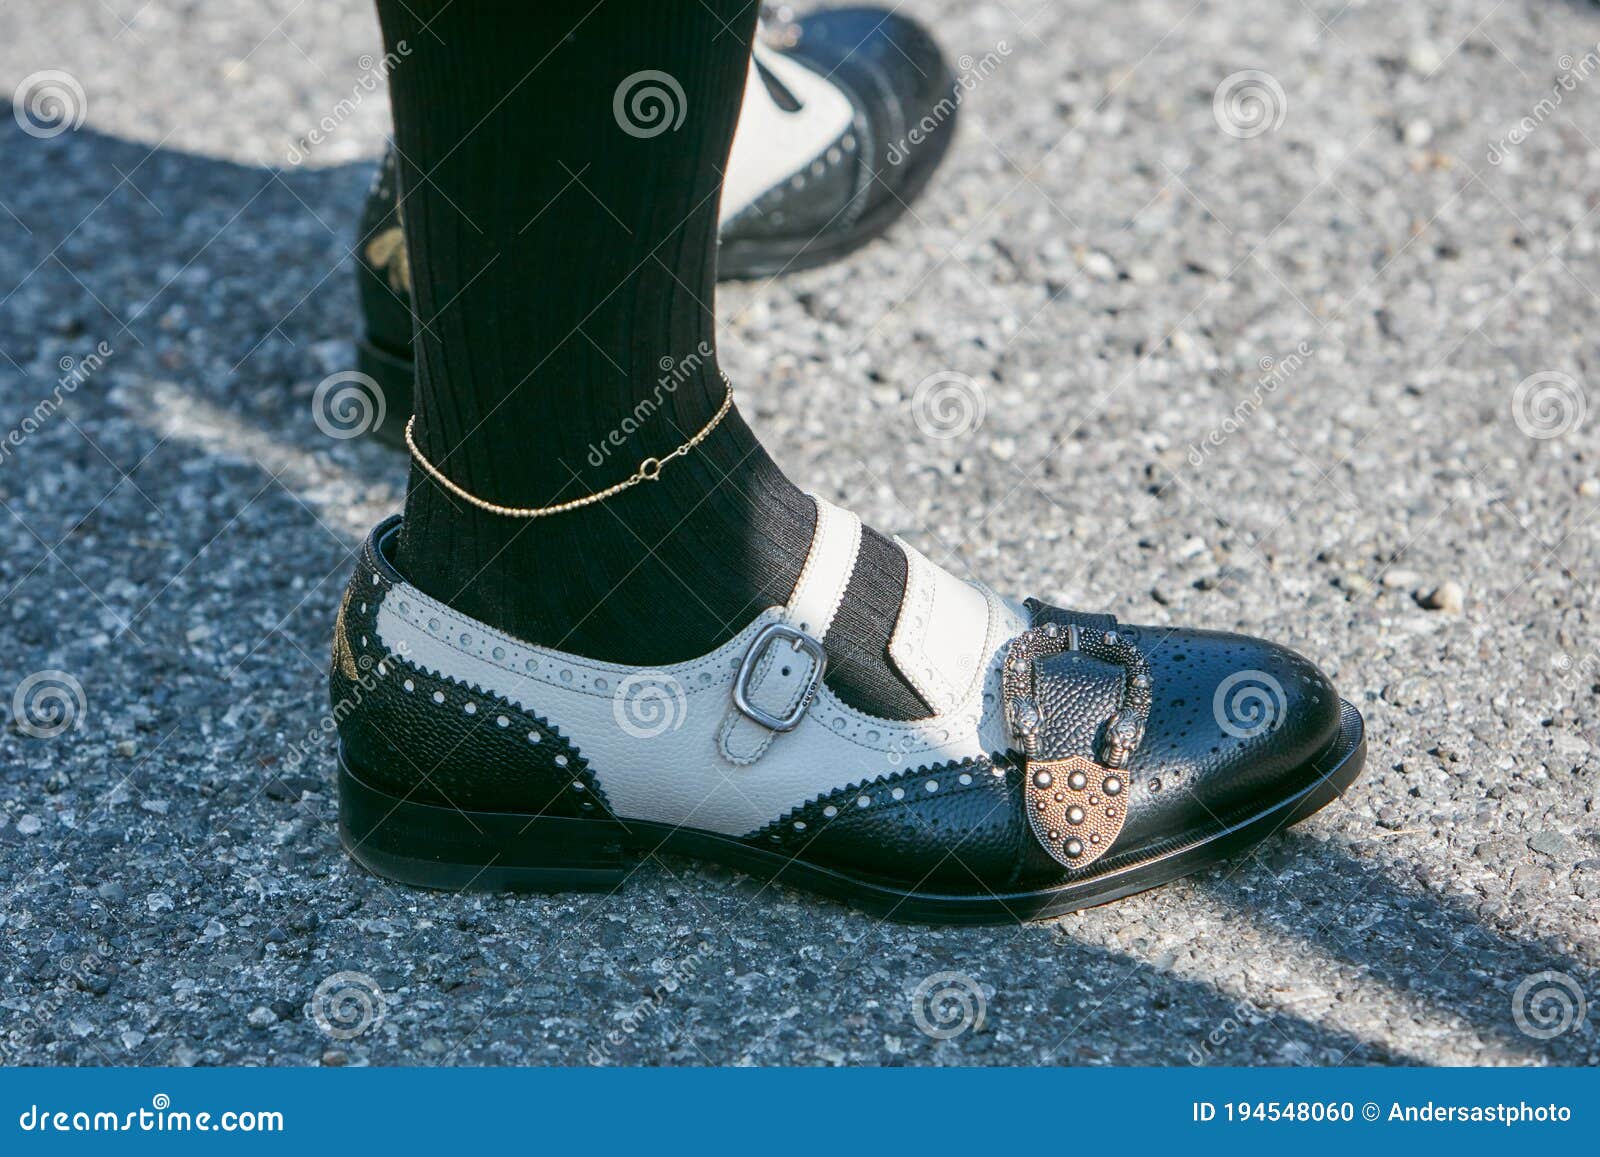 Man with Black and White Leather Gucci Shoes and Golden Anklet